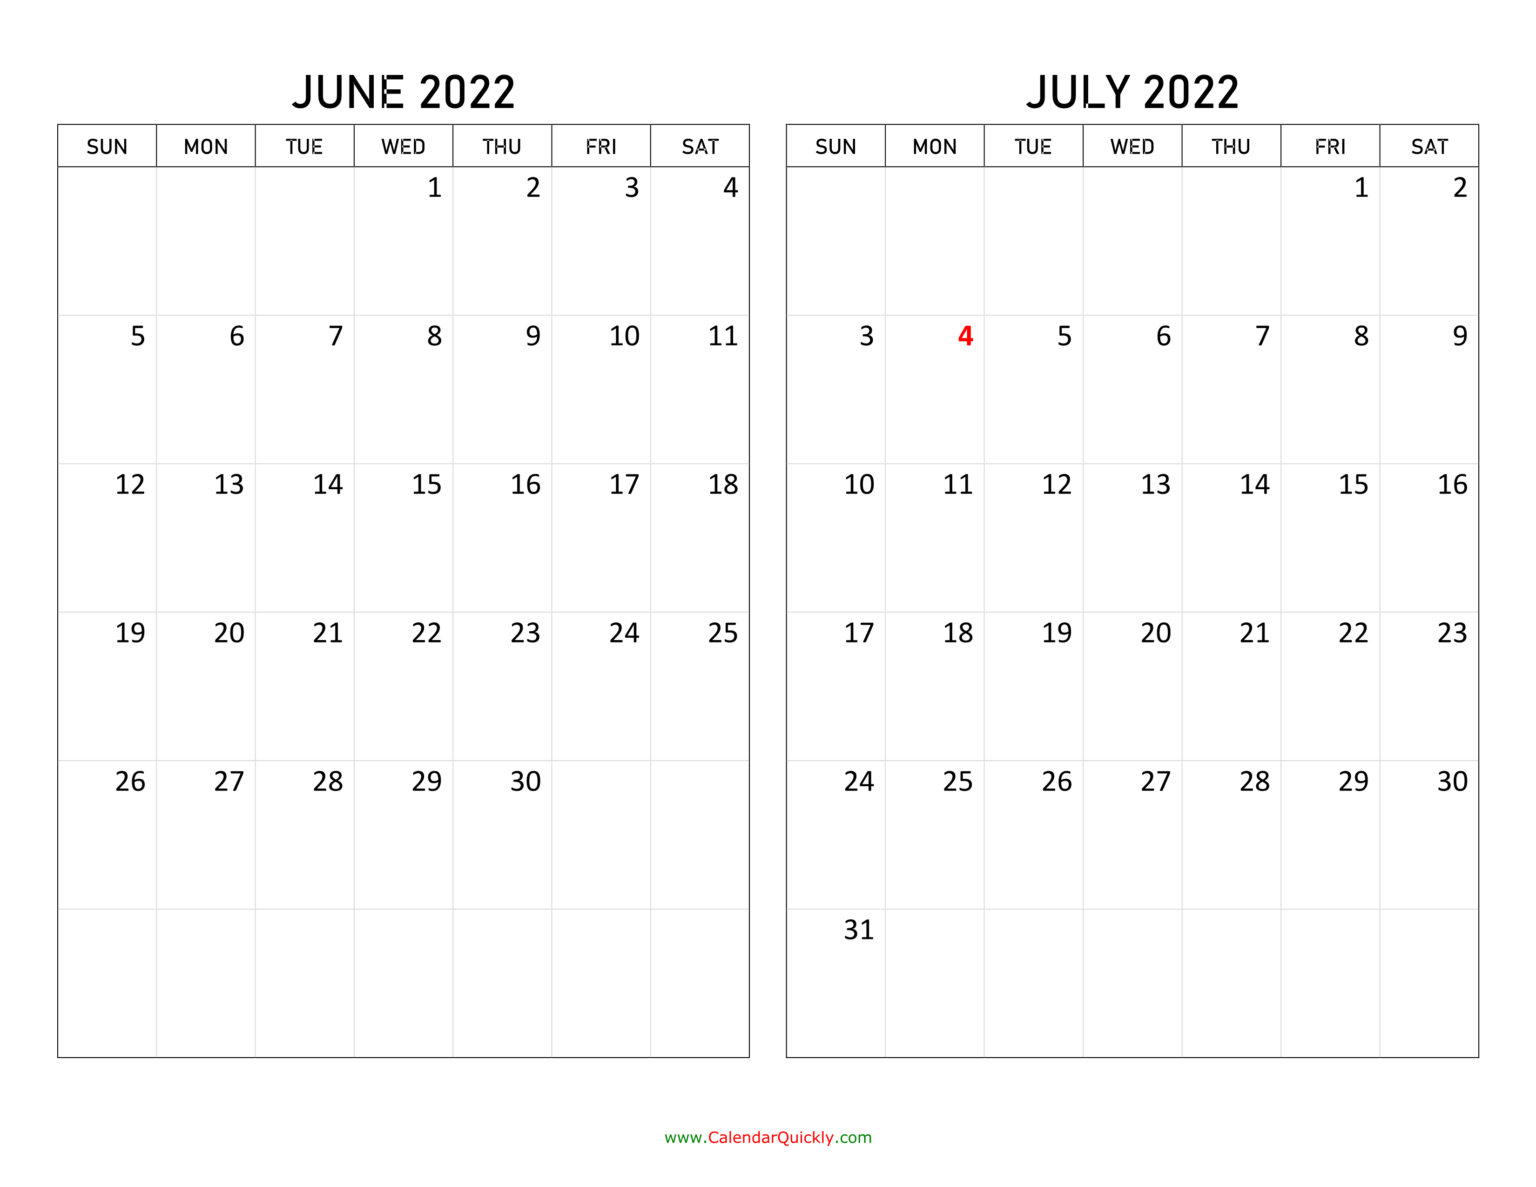 Catch How Many Months Until July 1 2022